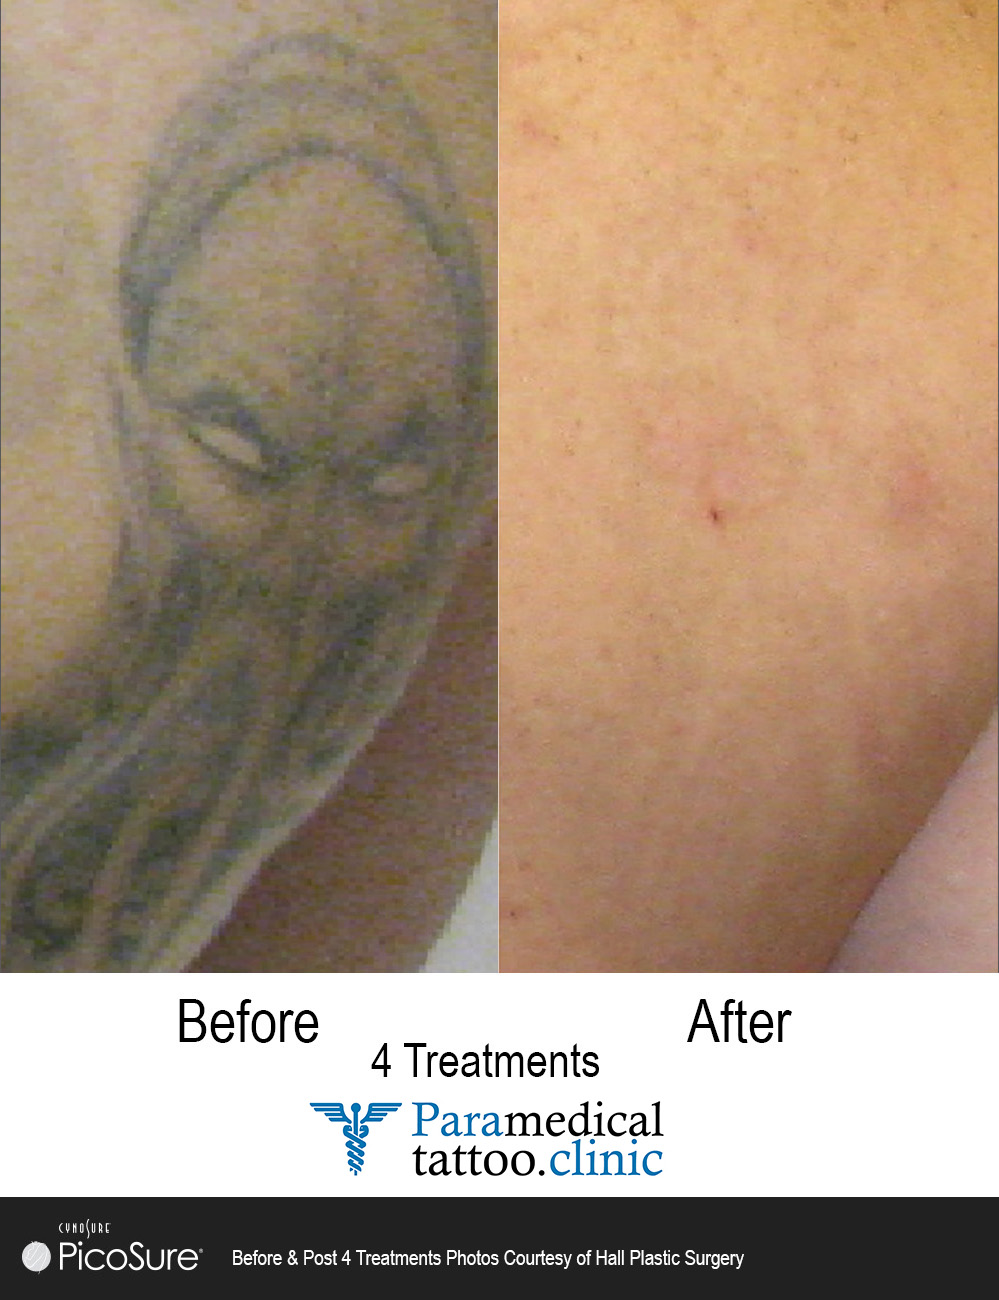 Beverly Hills Picosure Laser Tattoo Removal - Does Tattoo Removal Hurt